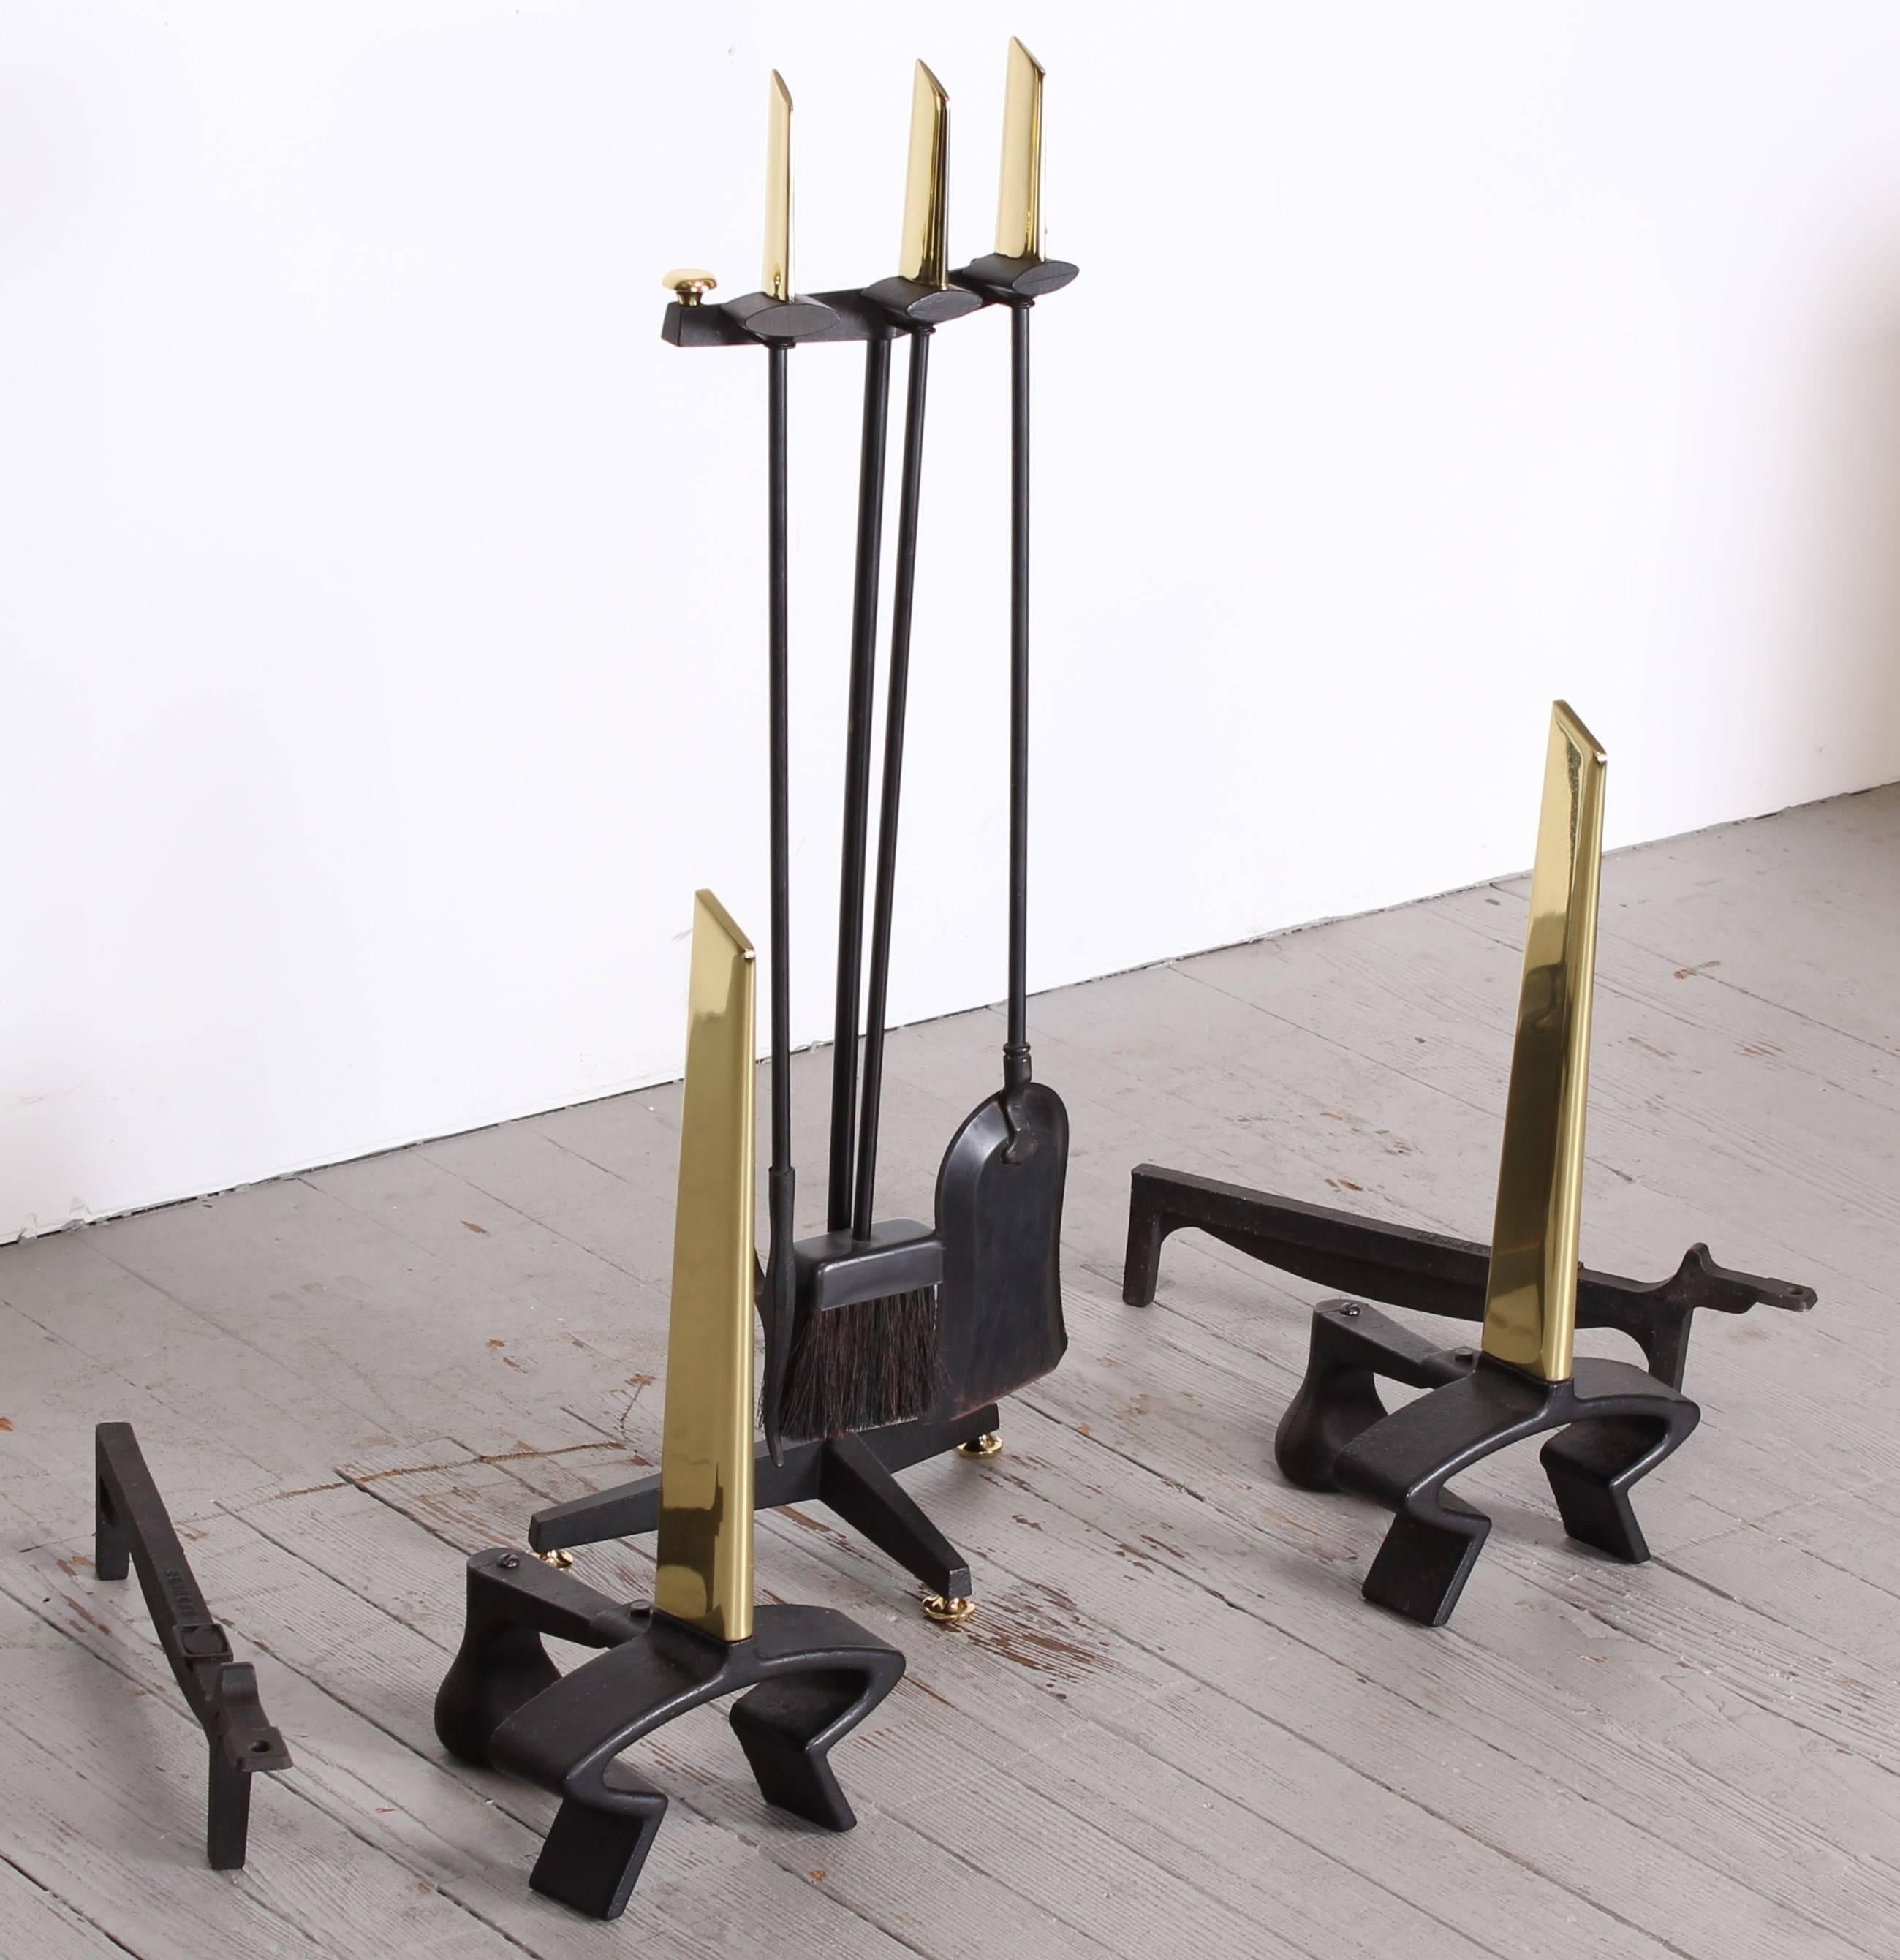 A sleek set of andirons and fireplace tool set by Donald Deskey marked Bennett. Dimensions of tools found below. Dimensions of andirons are 19.25